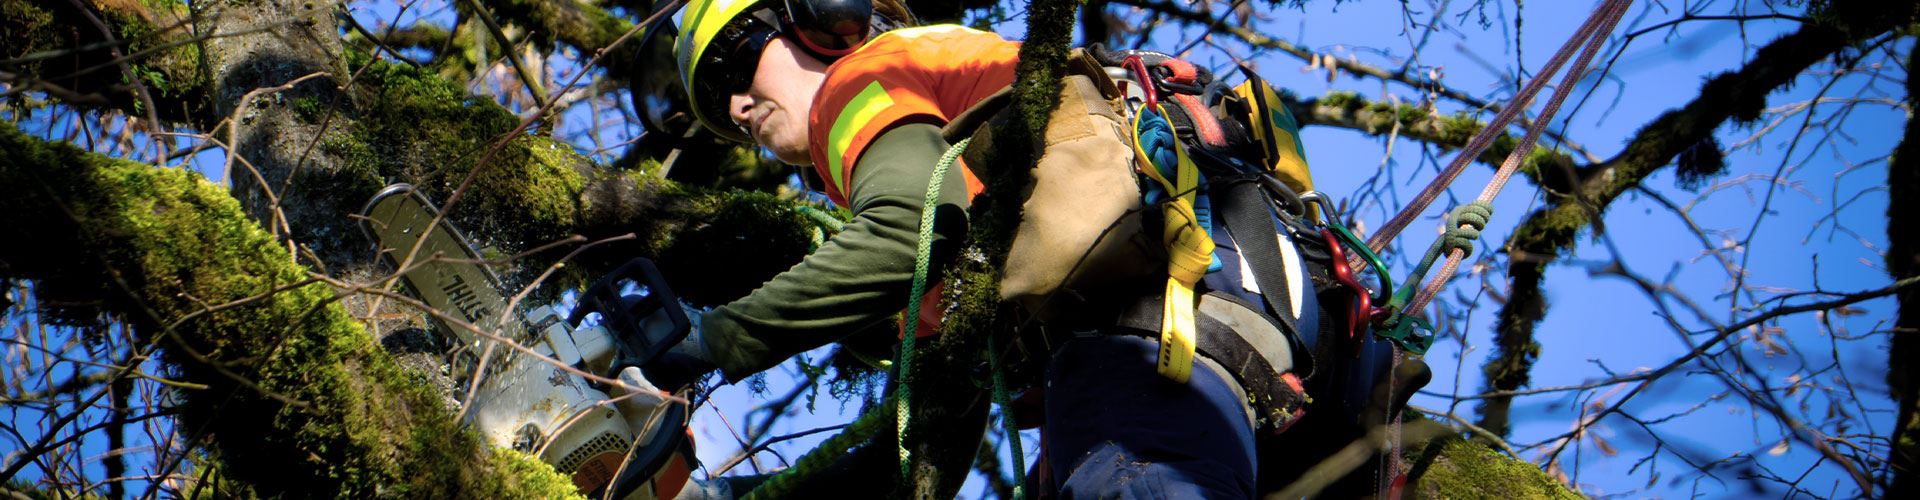 Person pruning tree wearing safety gear